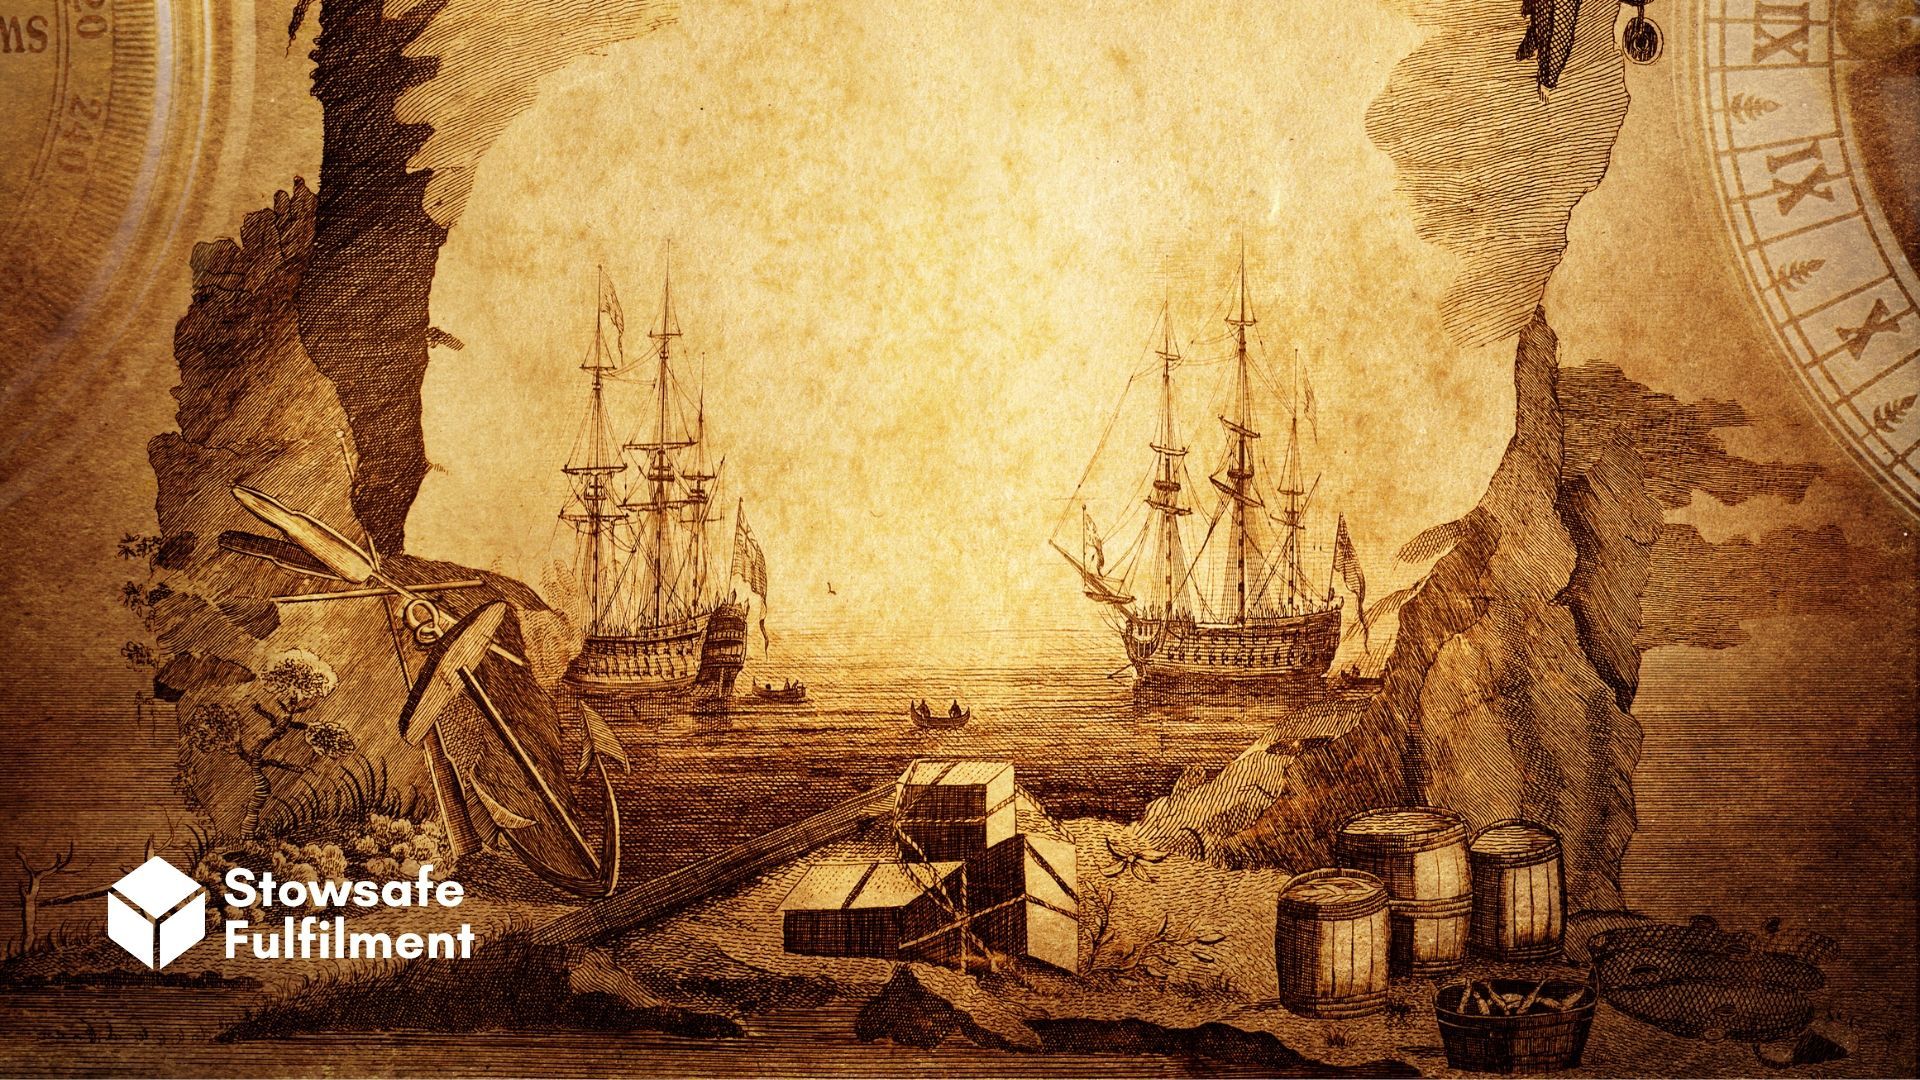 Explore the rich history of imports and exports and their impact on economics, culture and politics. Discover the future of logistics and trade.